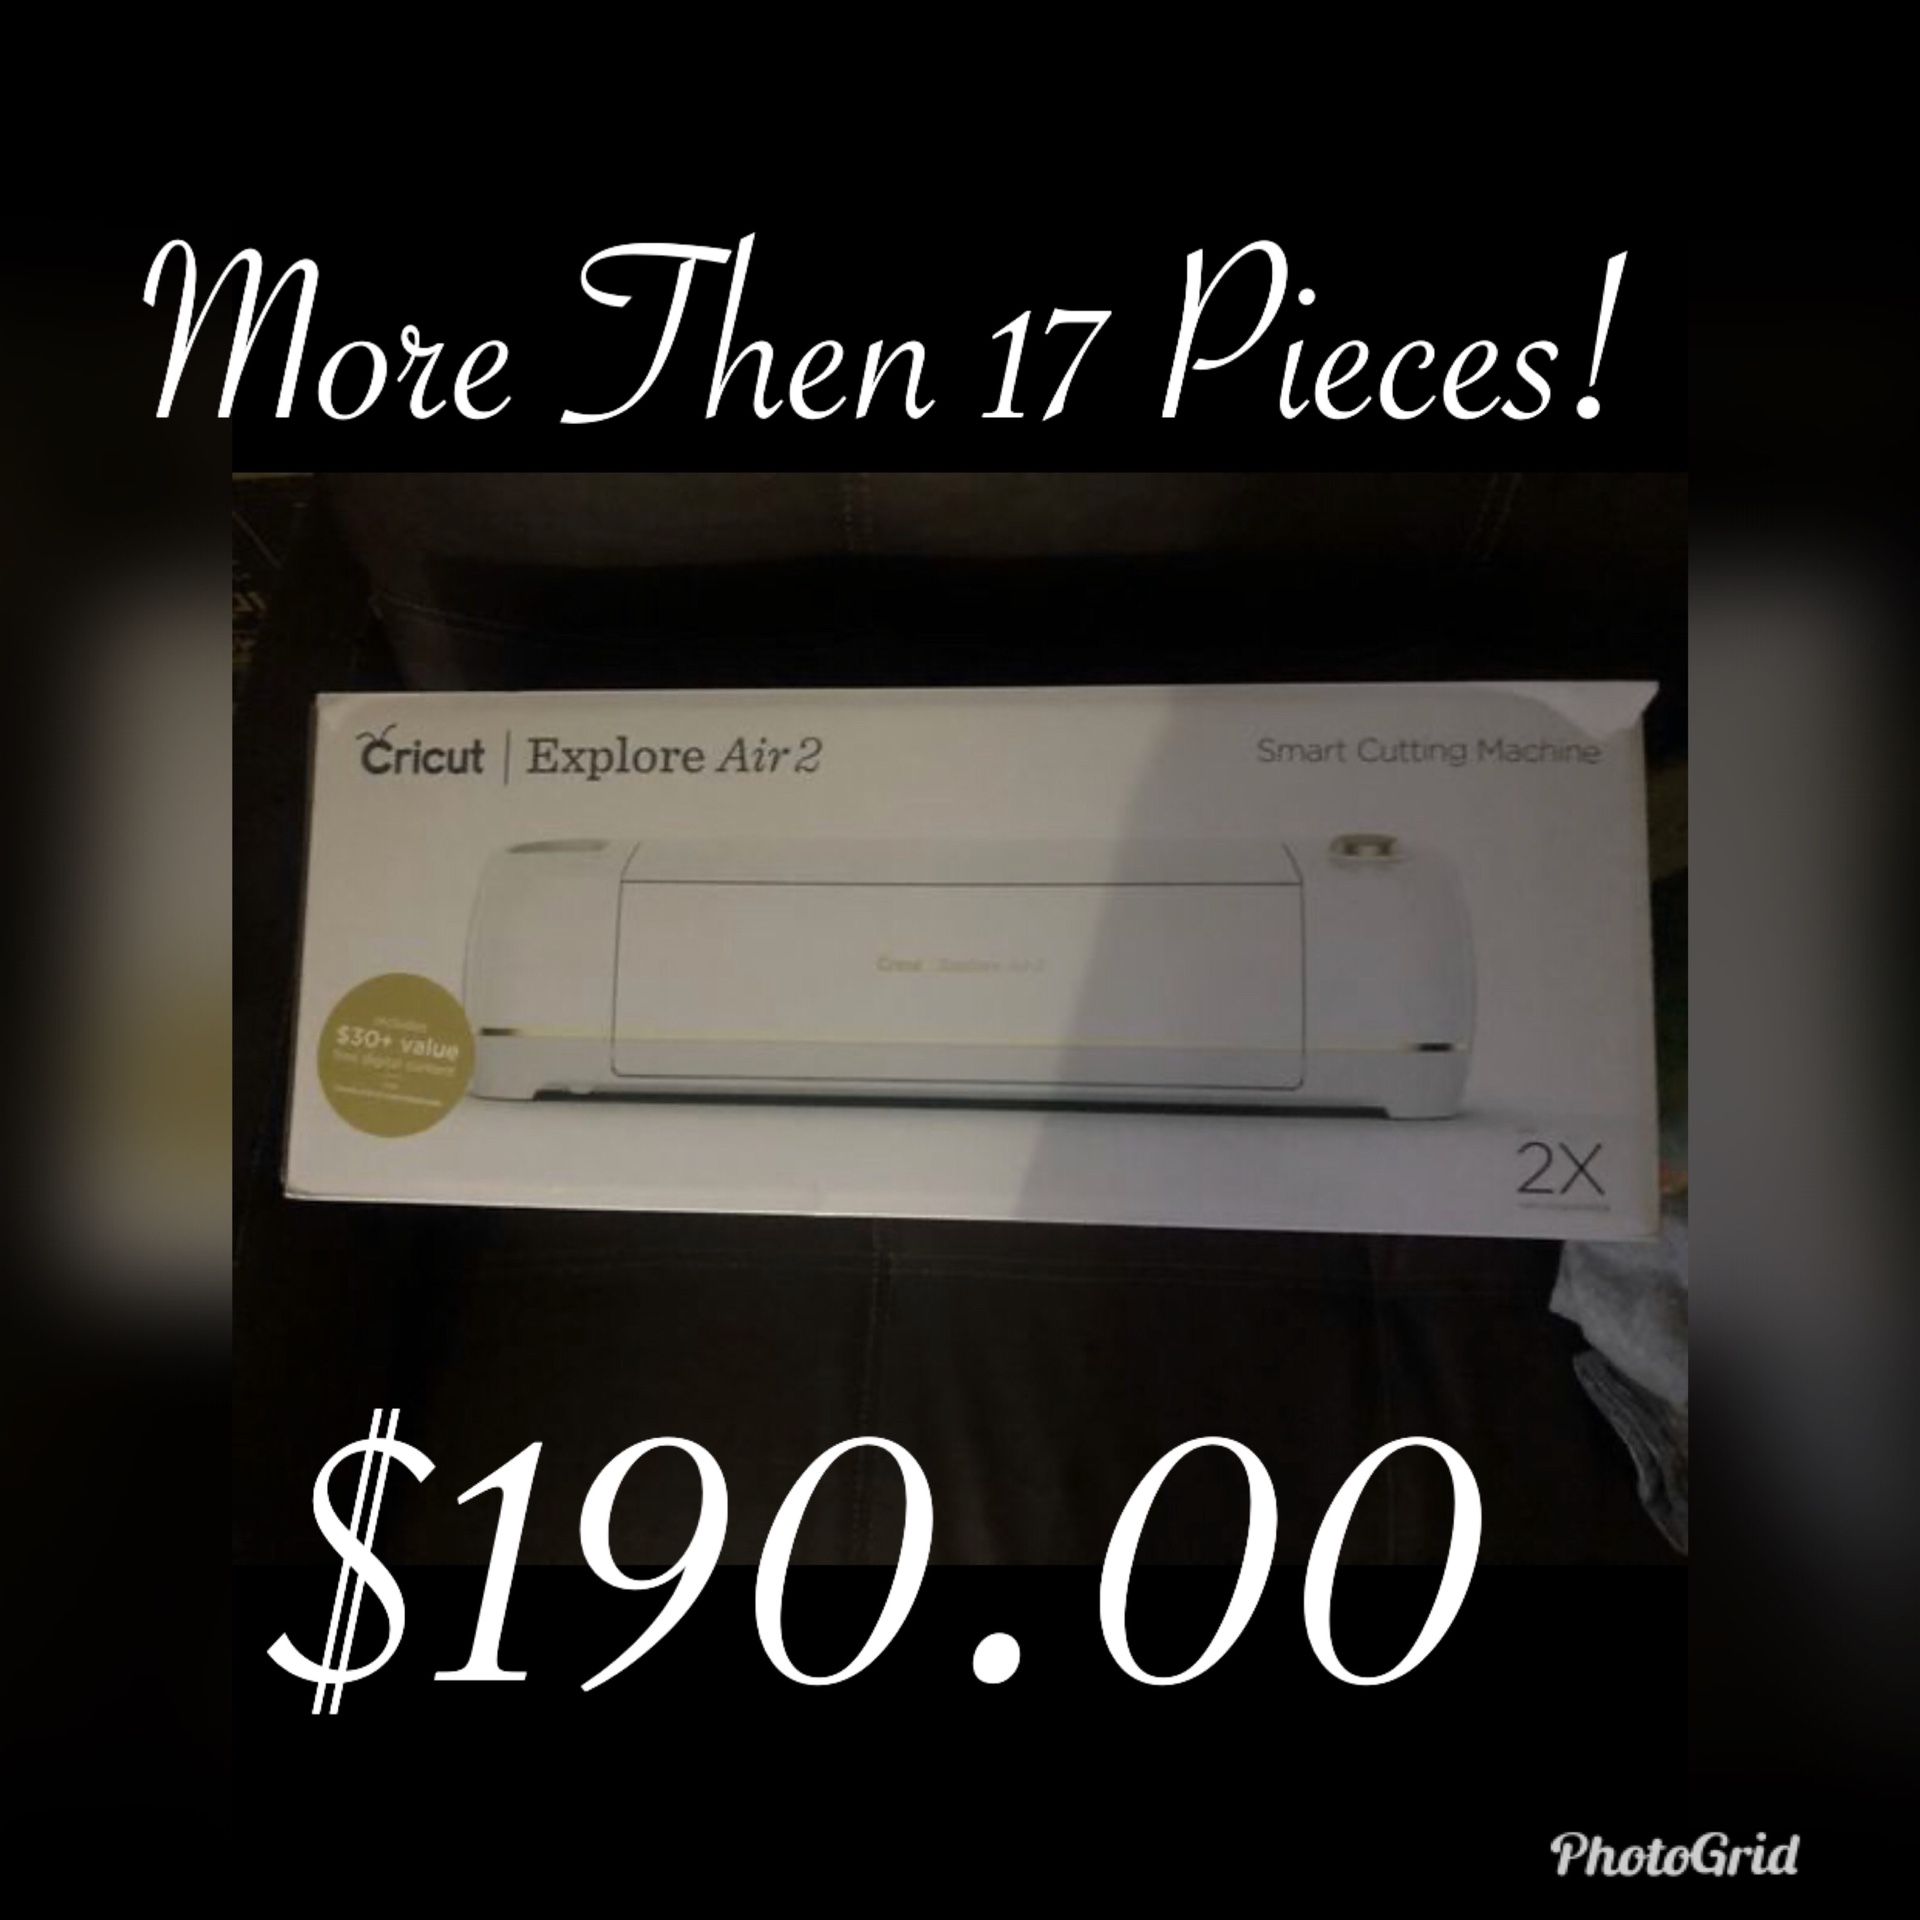 CRICUT CUT SMART (2 ) $190 17 pieces set over $420 dollars in store.